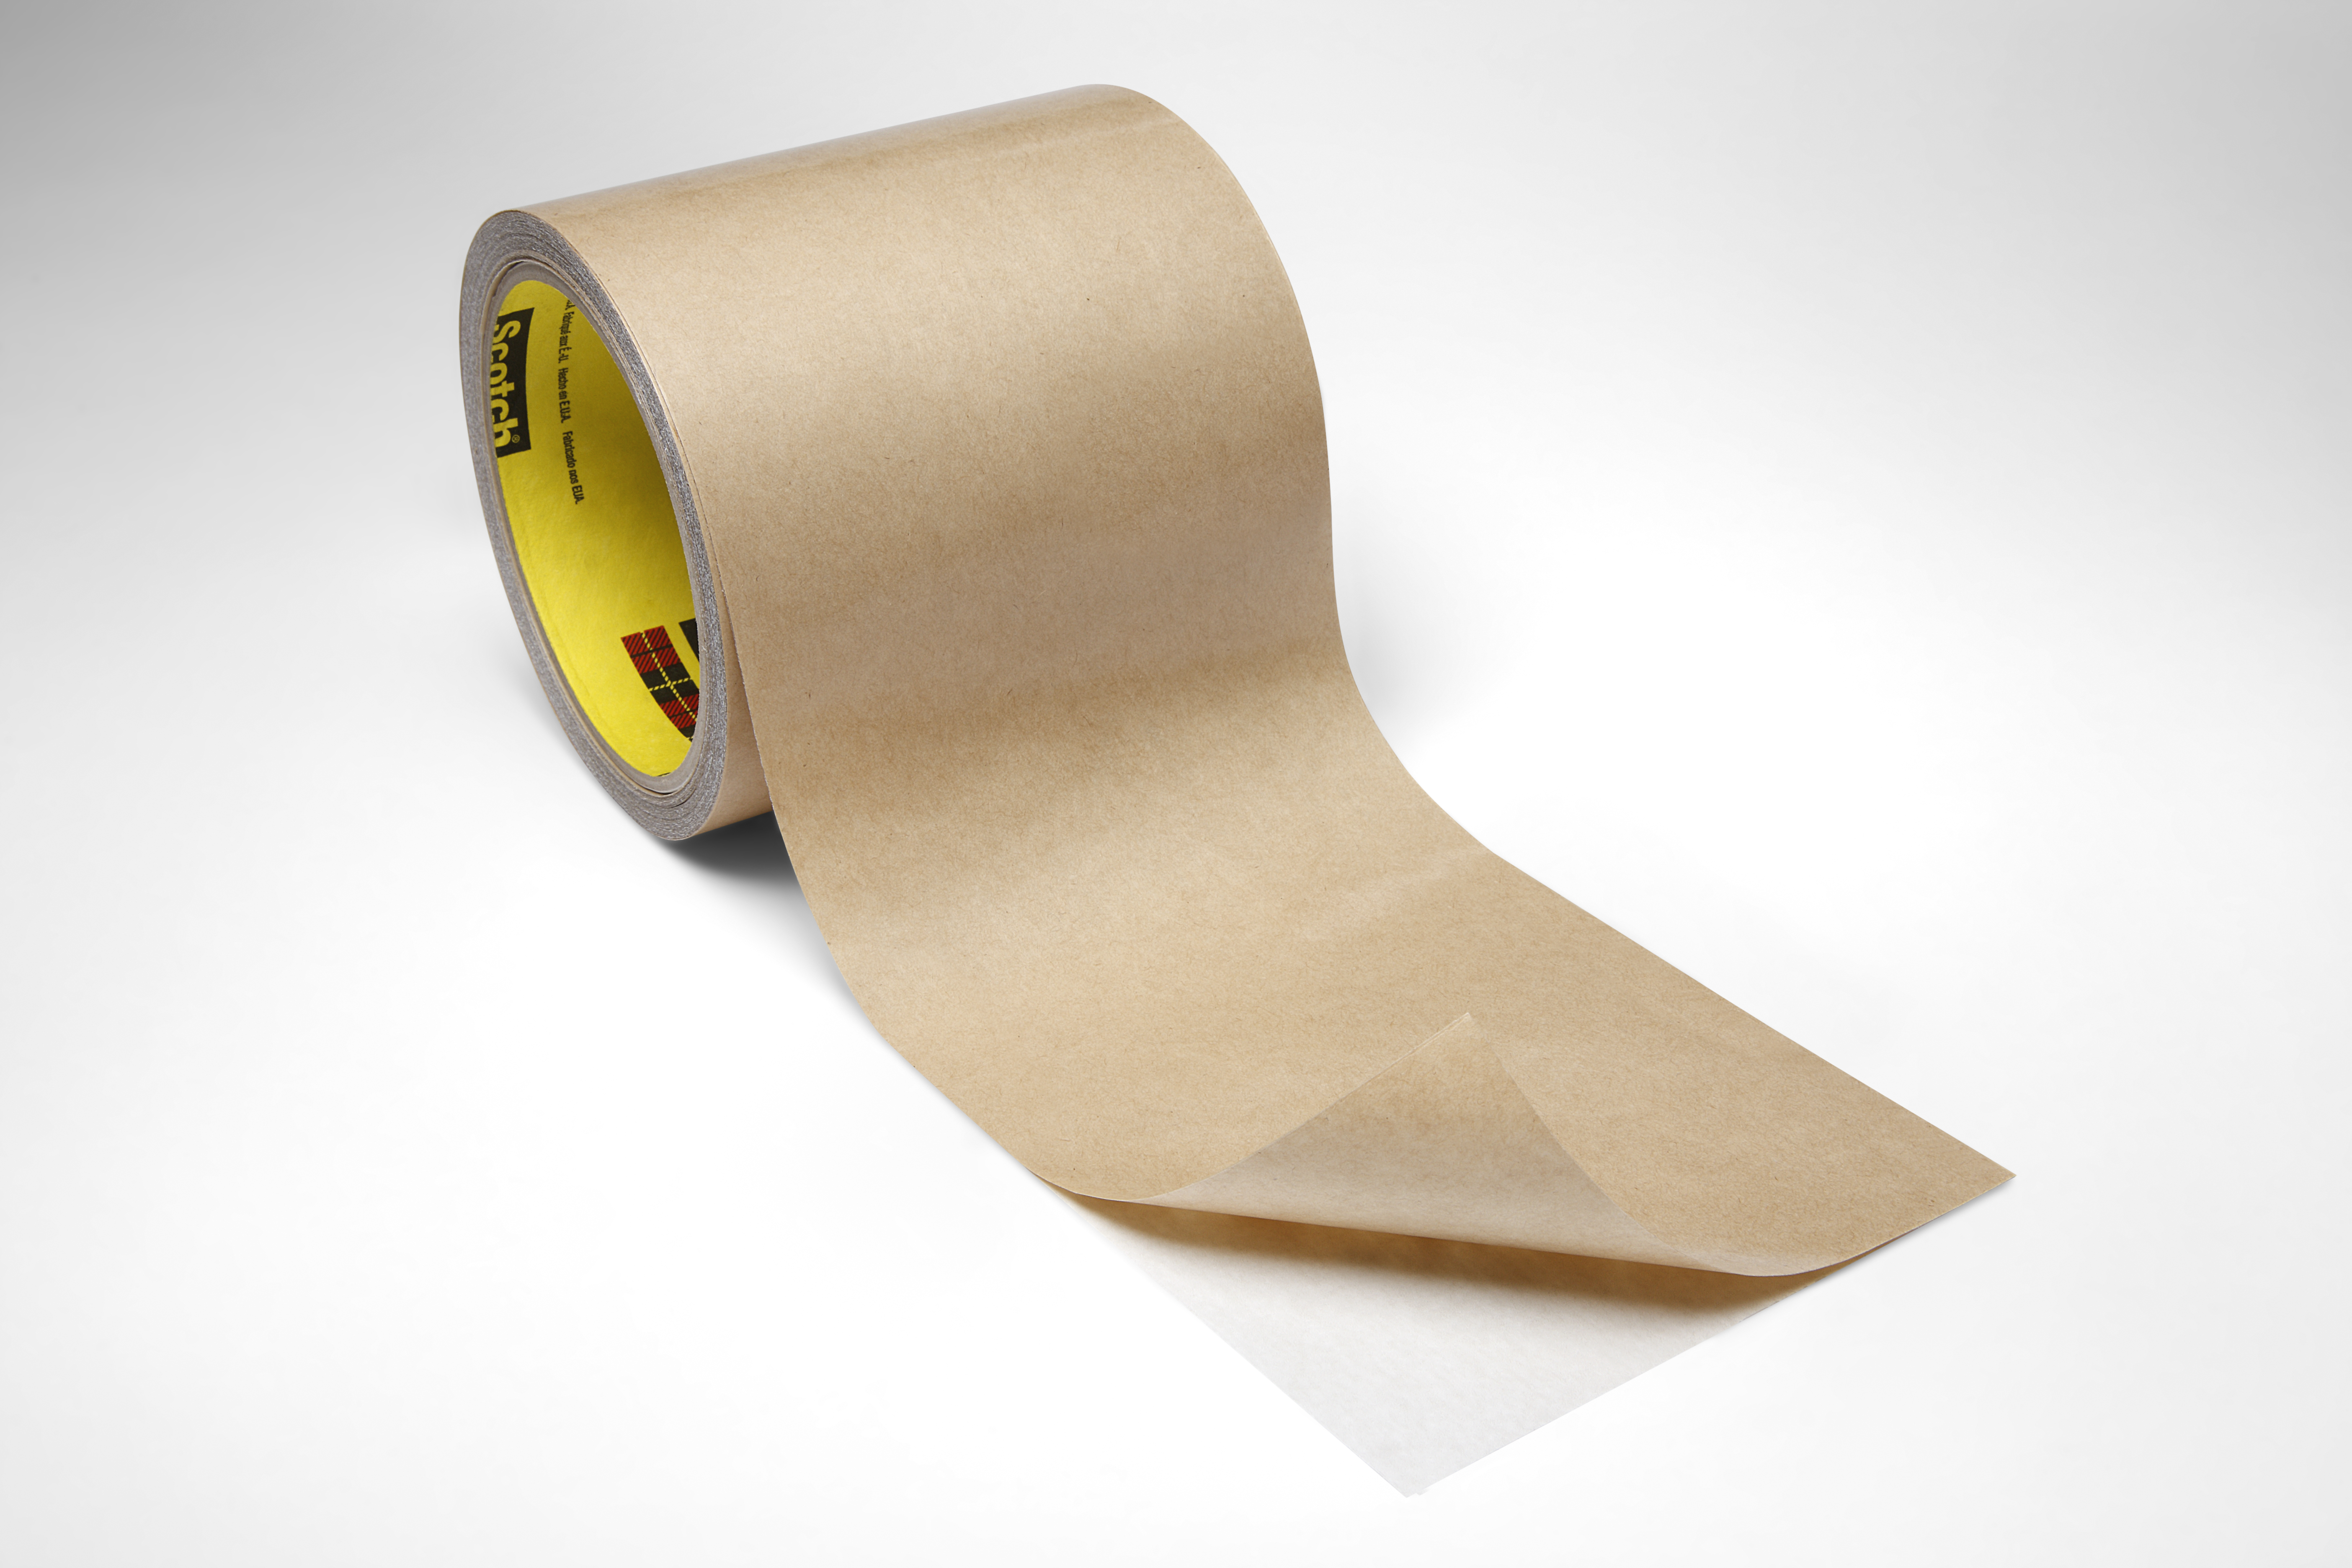 Part # 9706, 3M™ Electrically Conductive Adhesive Transfer Tape On  Converters, Inc.